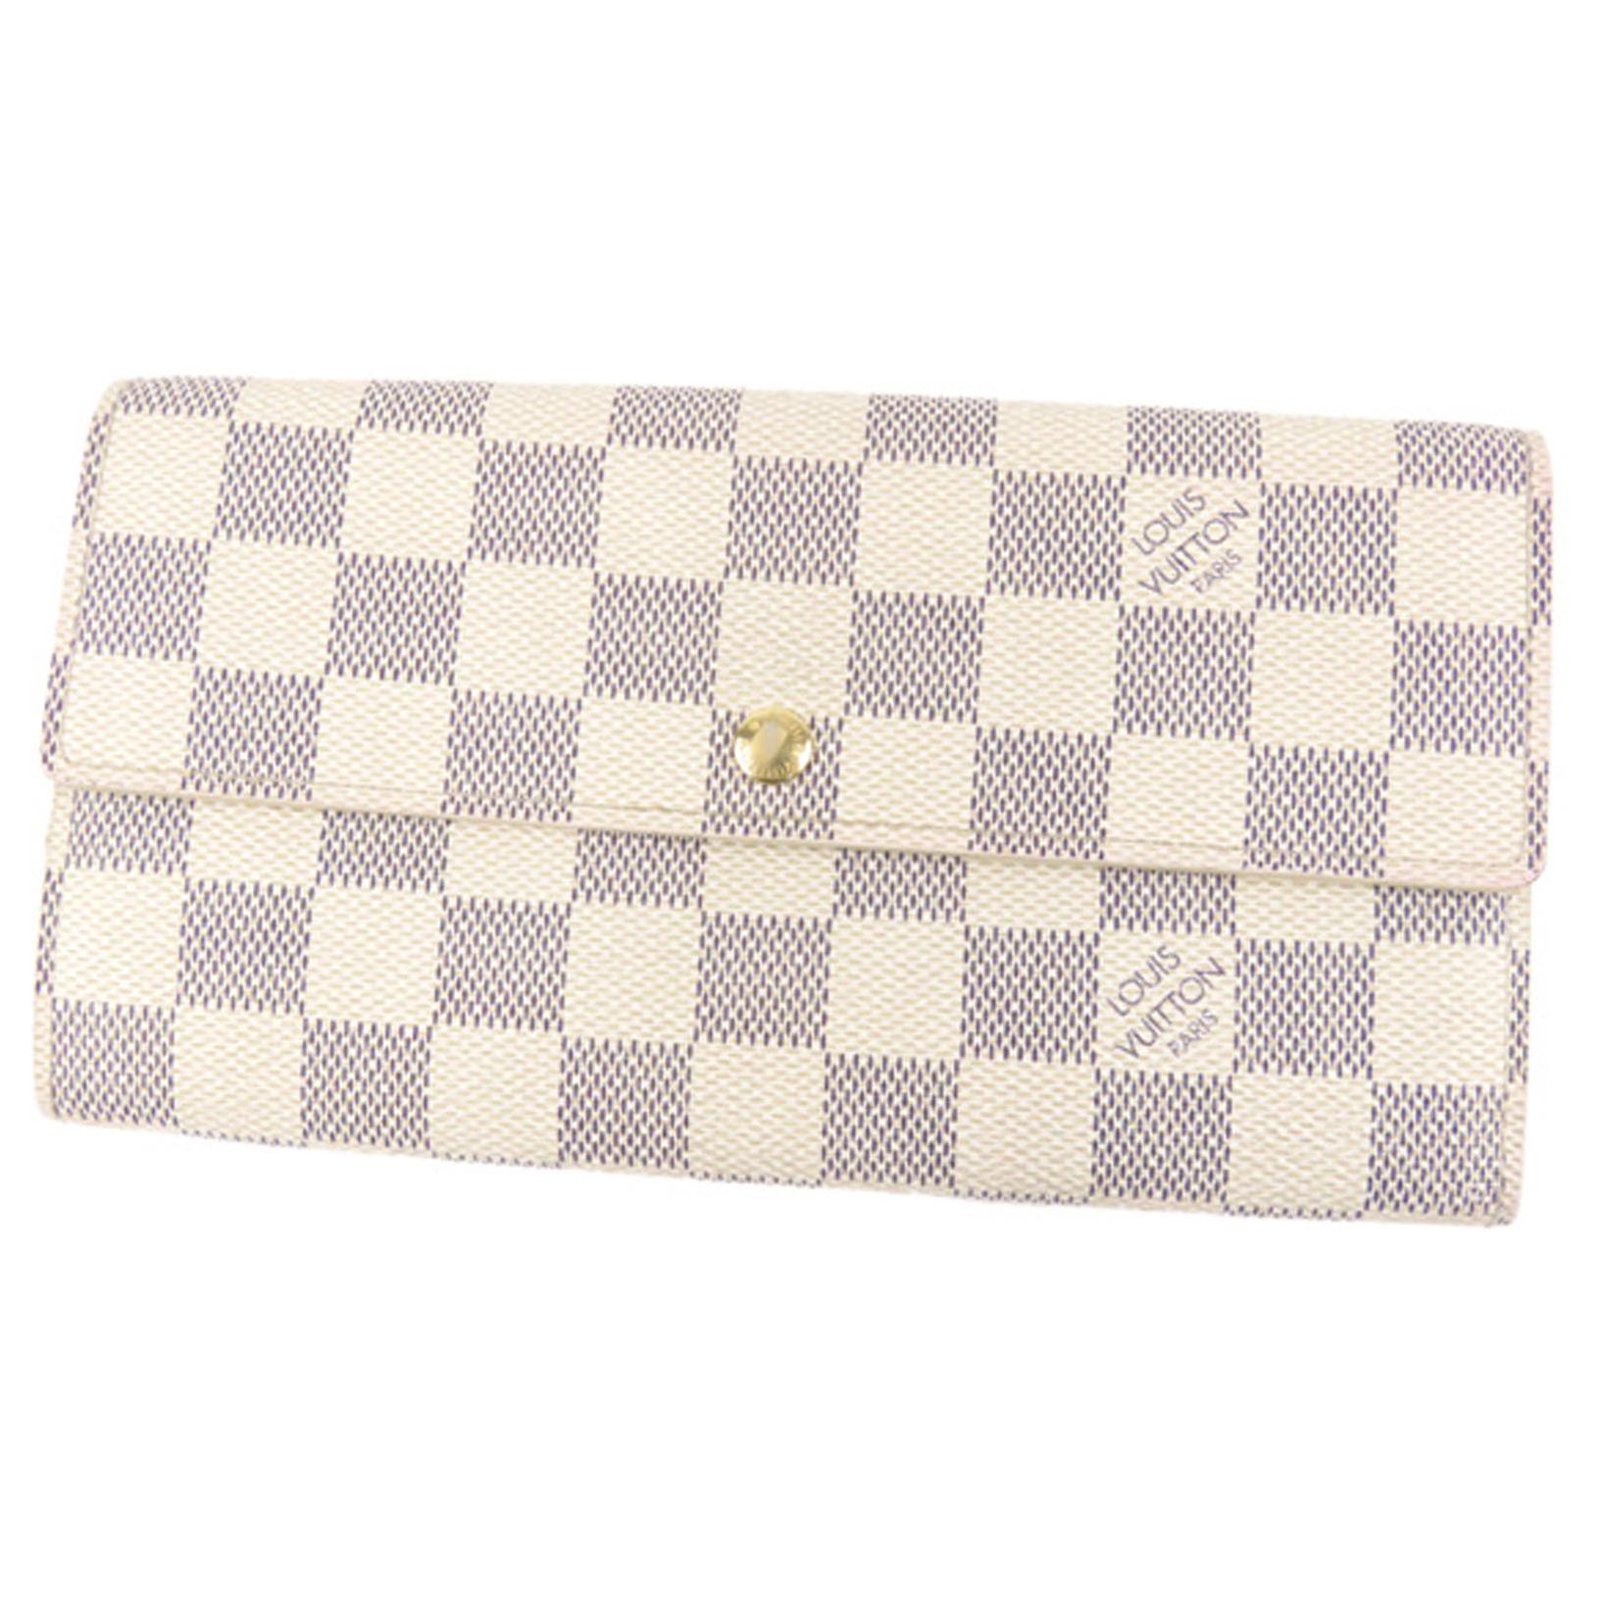 louis vuitton wallet blue and white